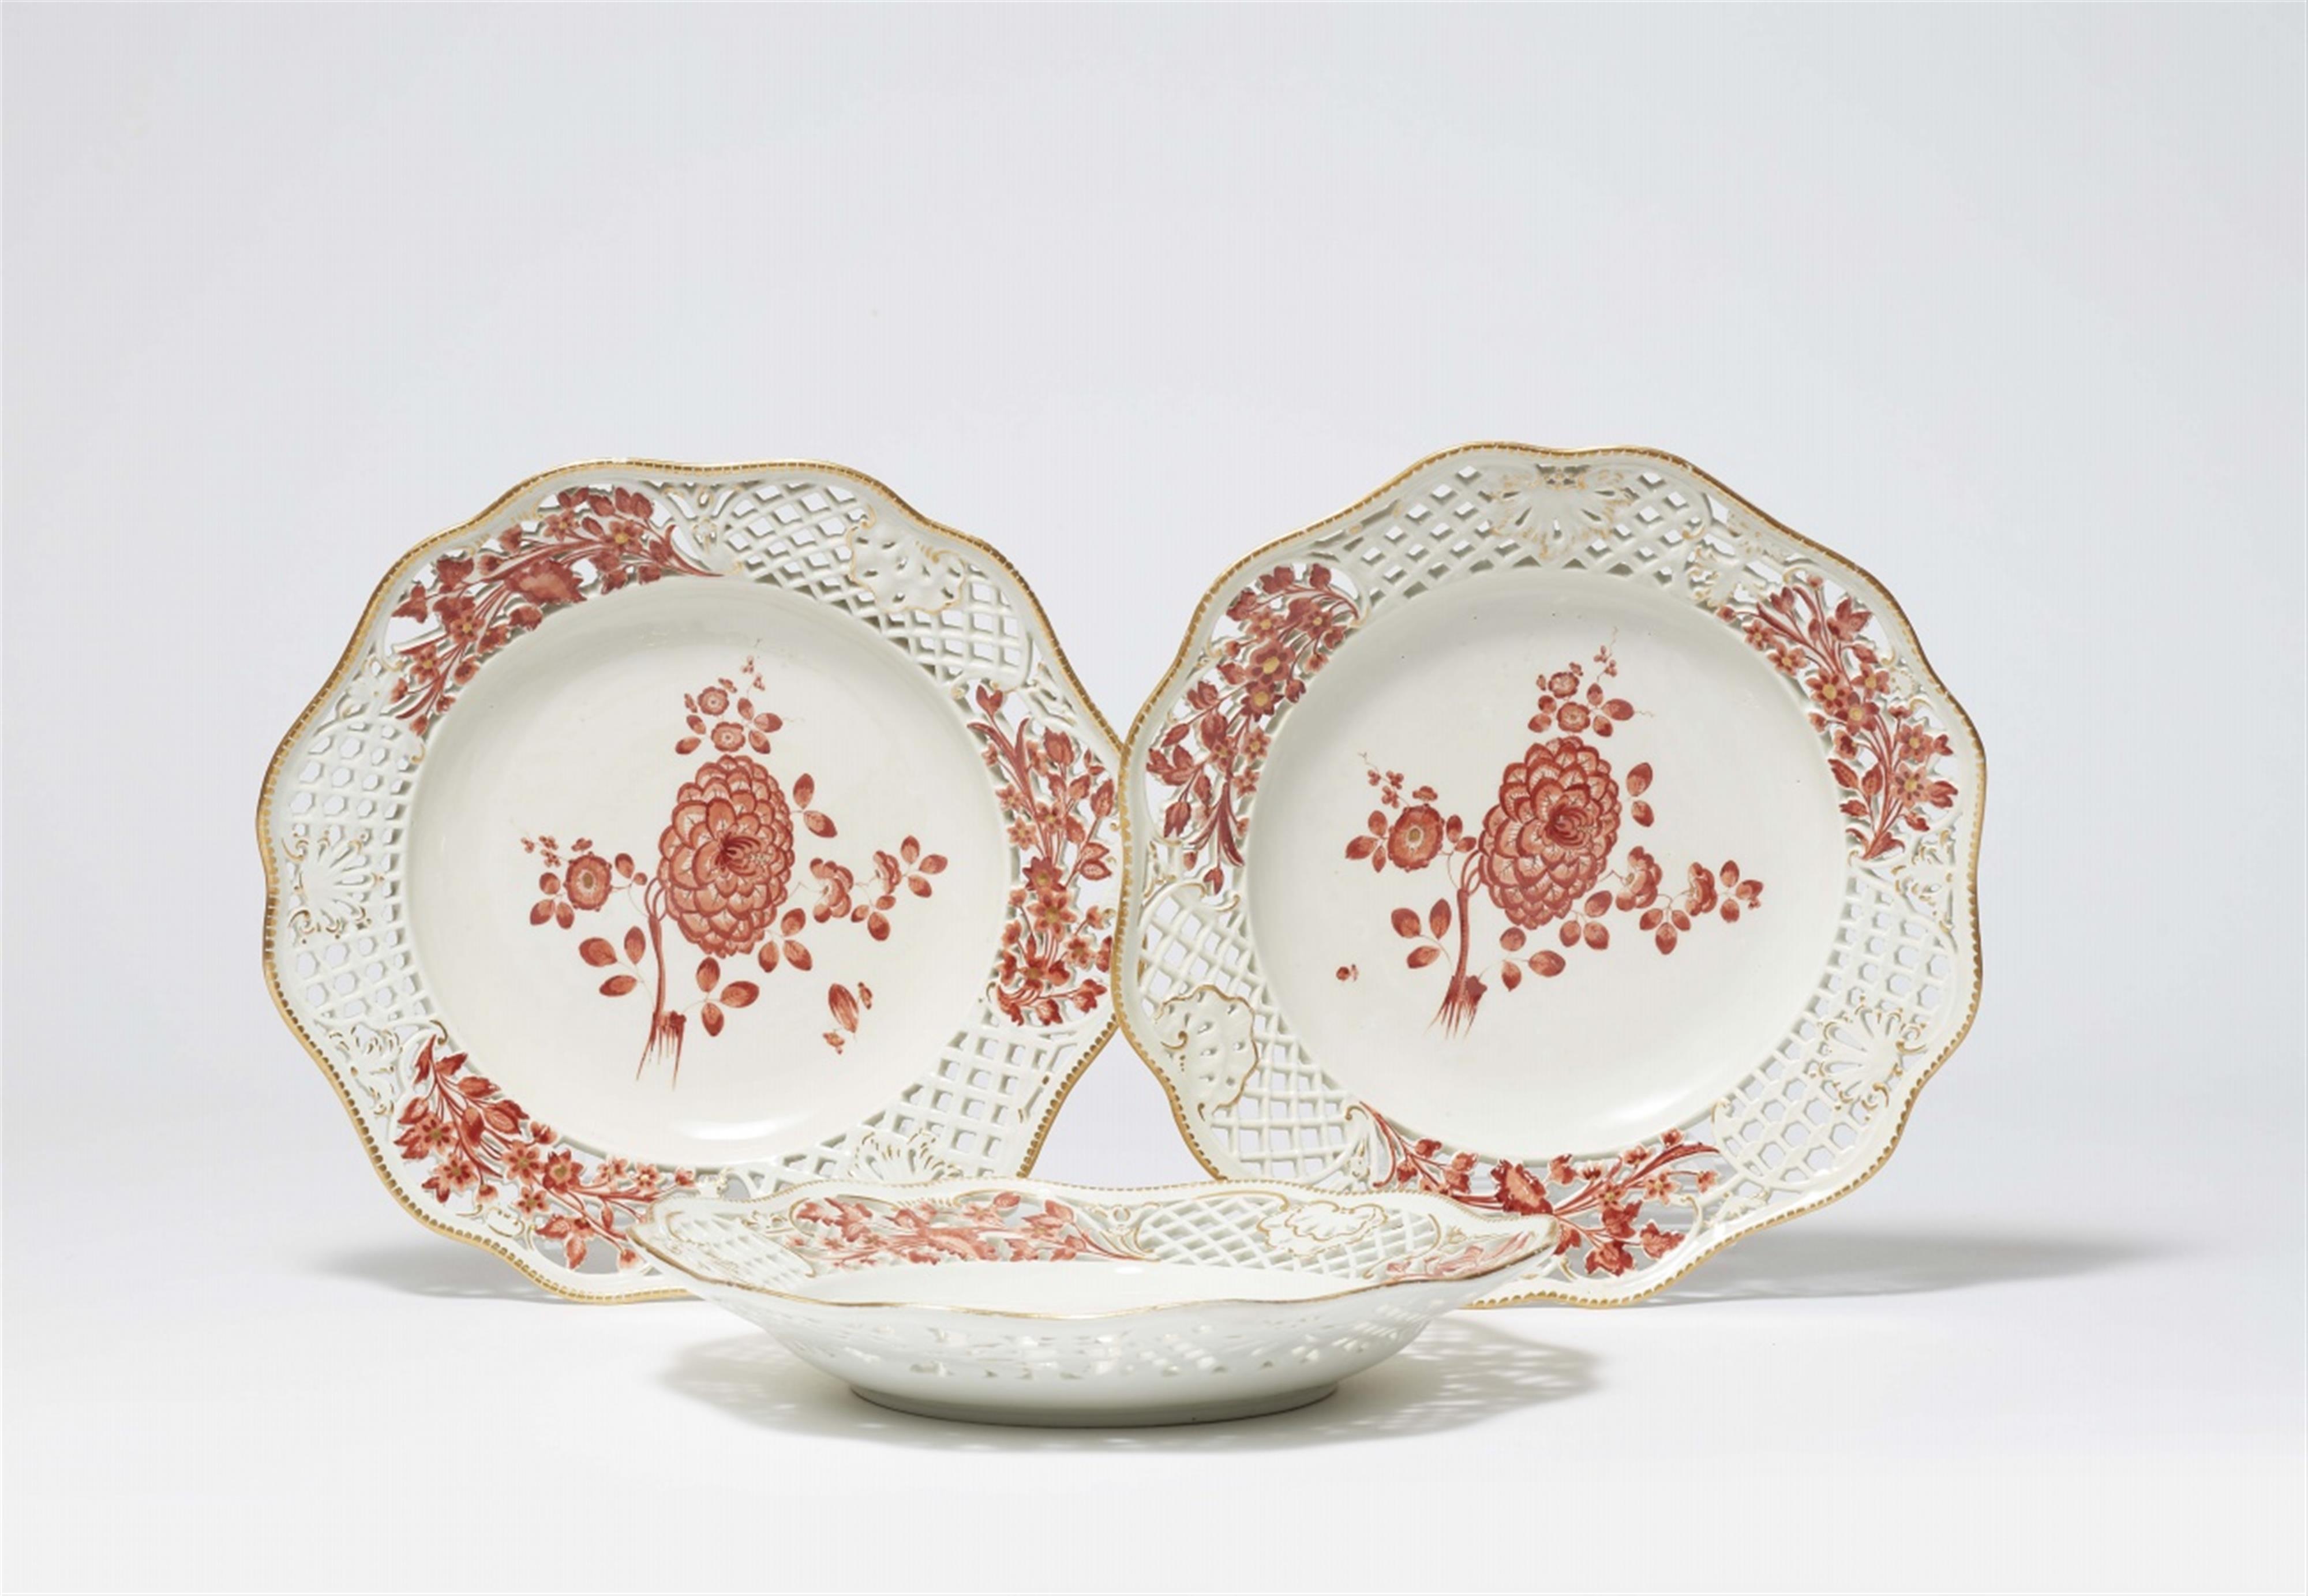 Three Meissen porcelain dessert plates from the service with red mosaic pattern borders - image-1